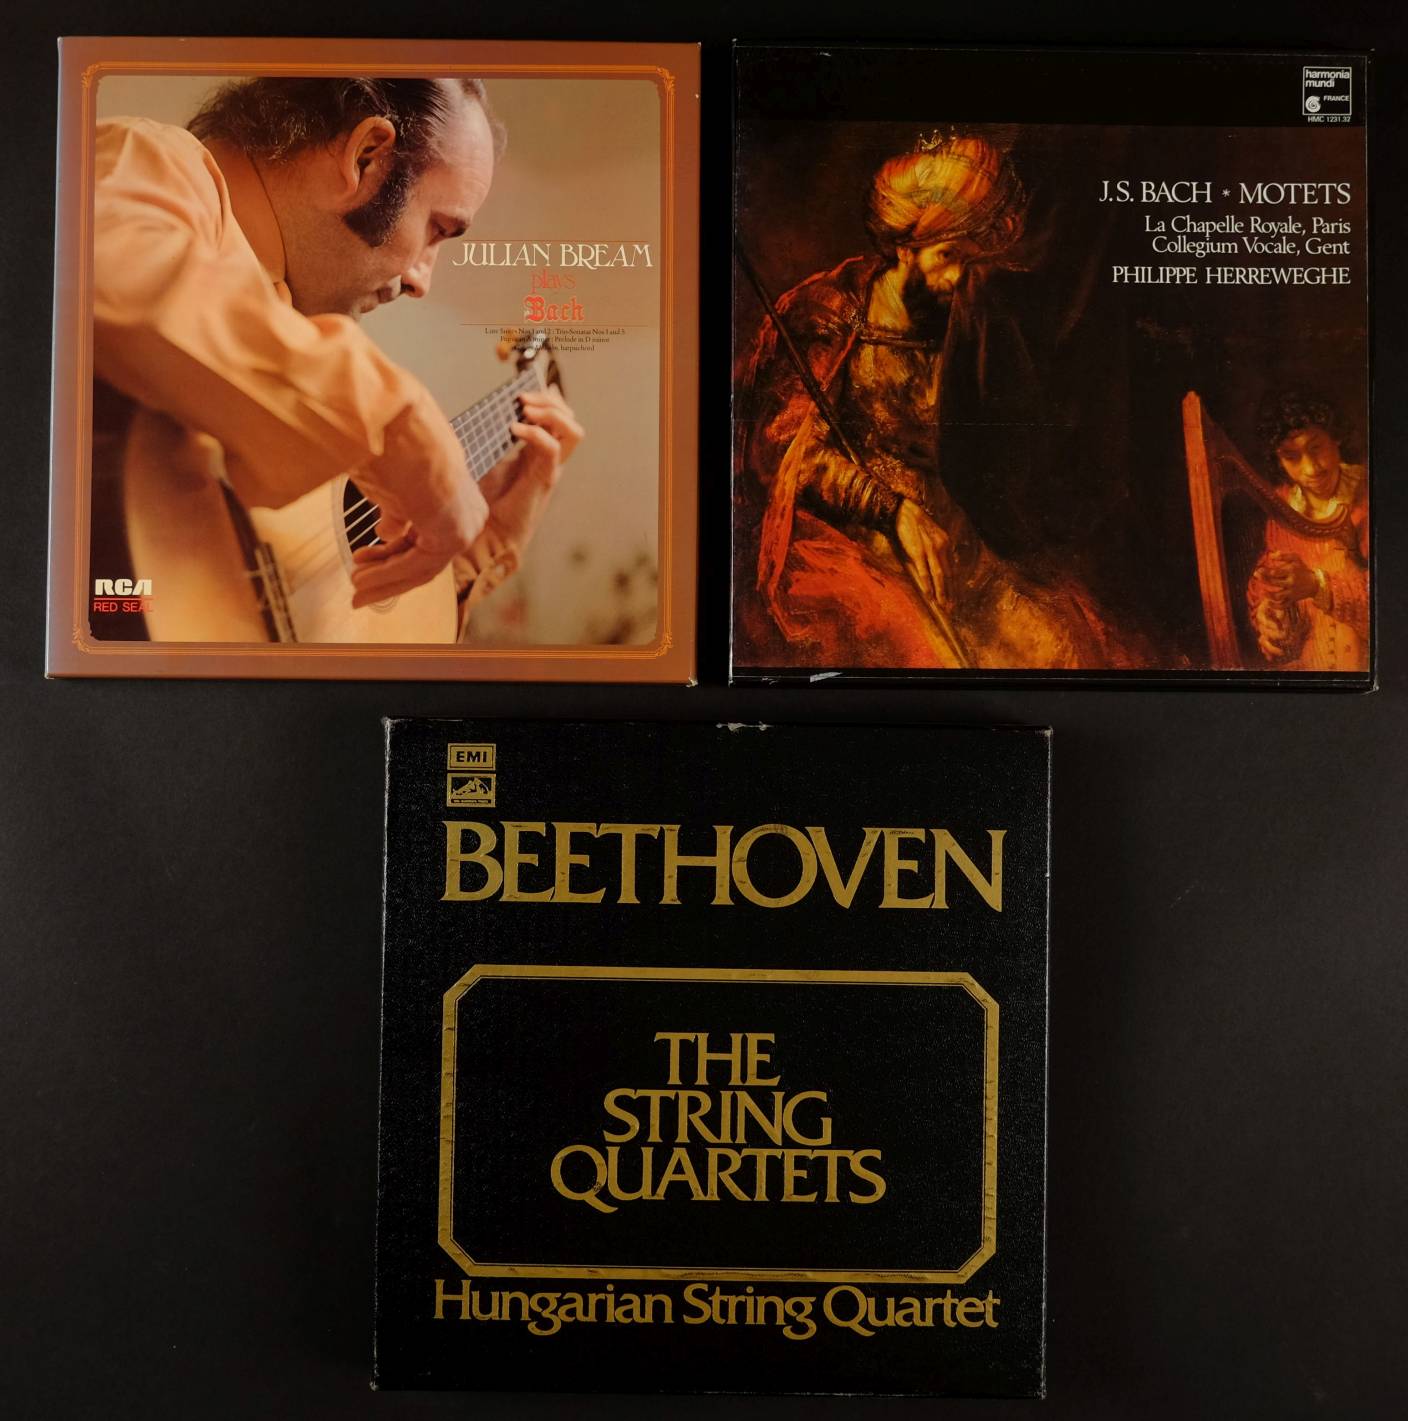 *Classical Records/Box Sets. A collection of 41 classical record box sets covering many of the - Image 13 of 13